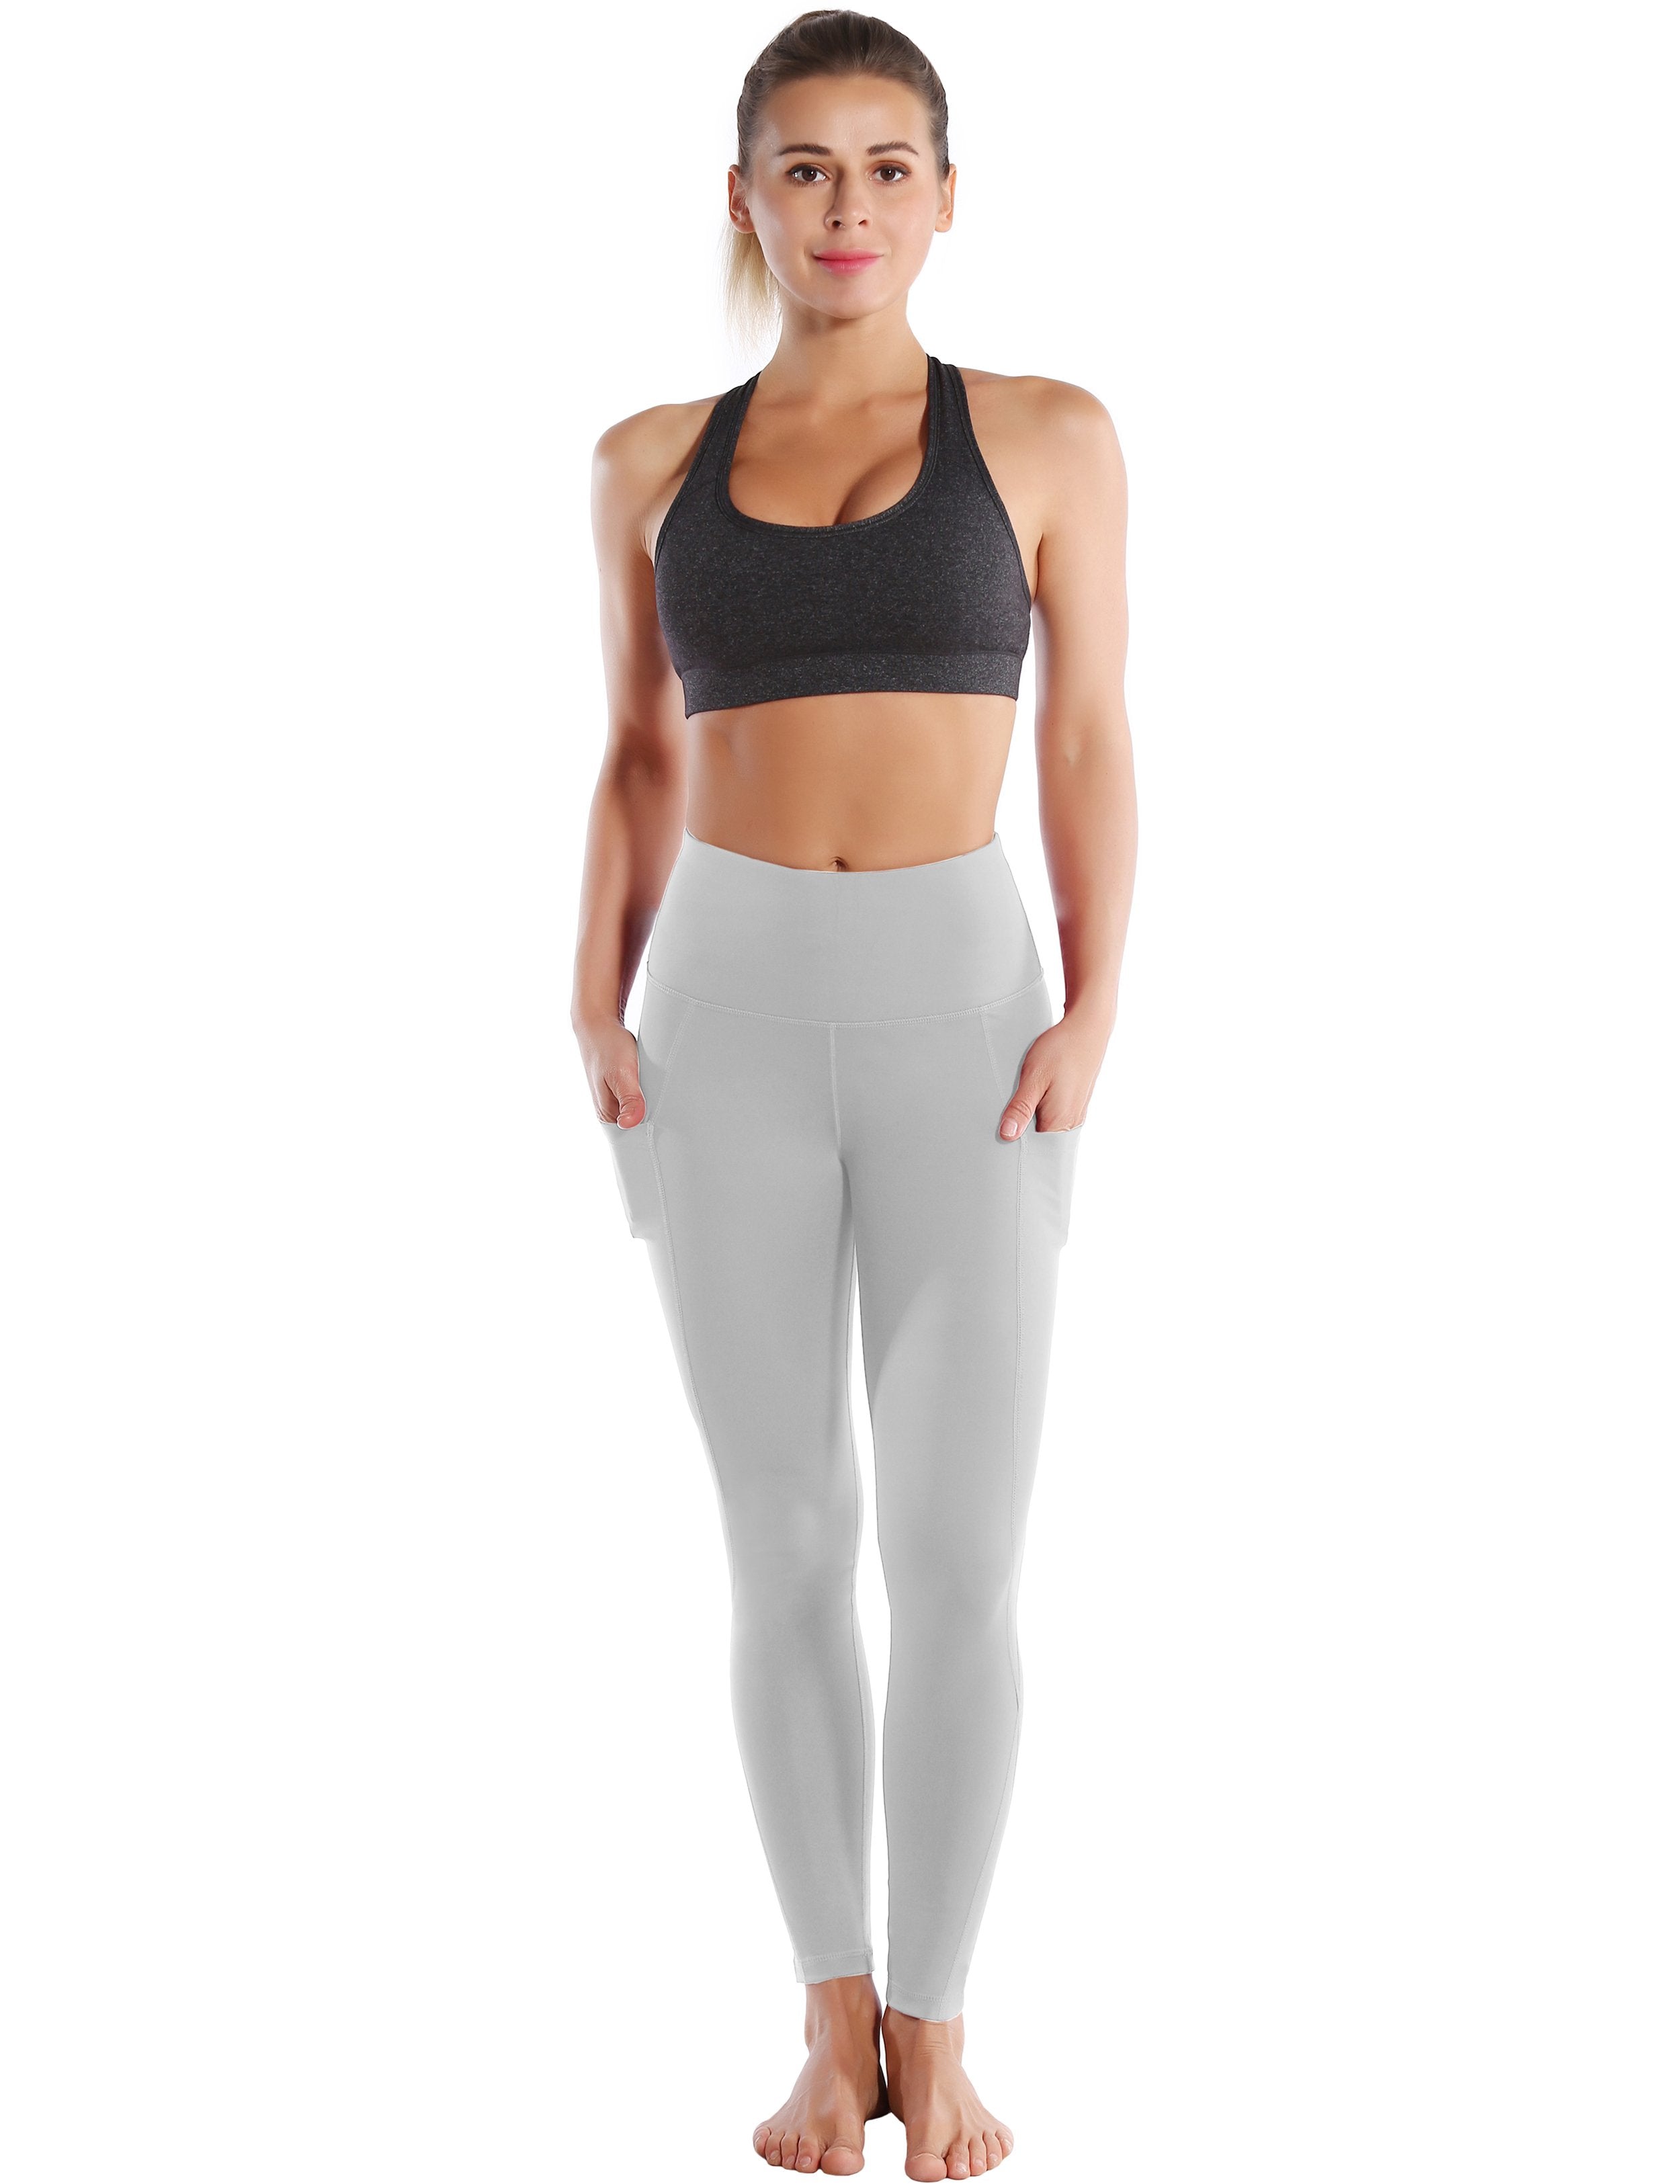 BNWT Bubblelime Size XL Grey Compression Yoga Pants with Side Pockets $36